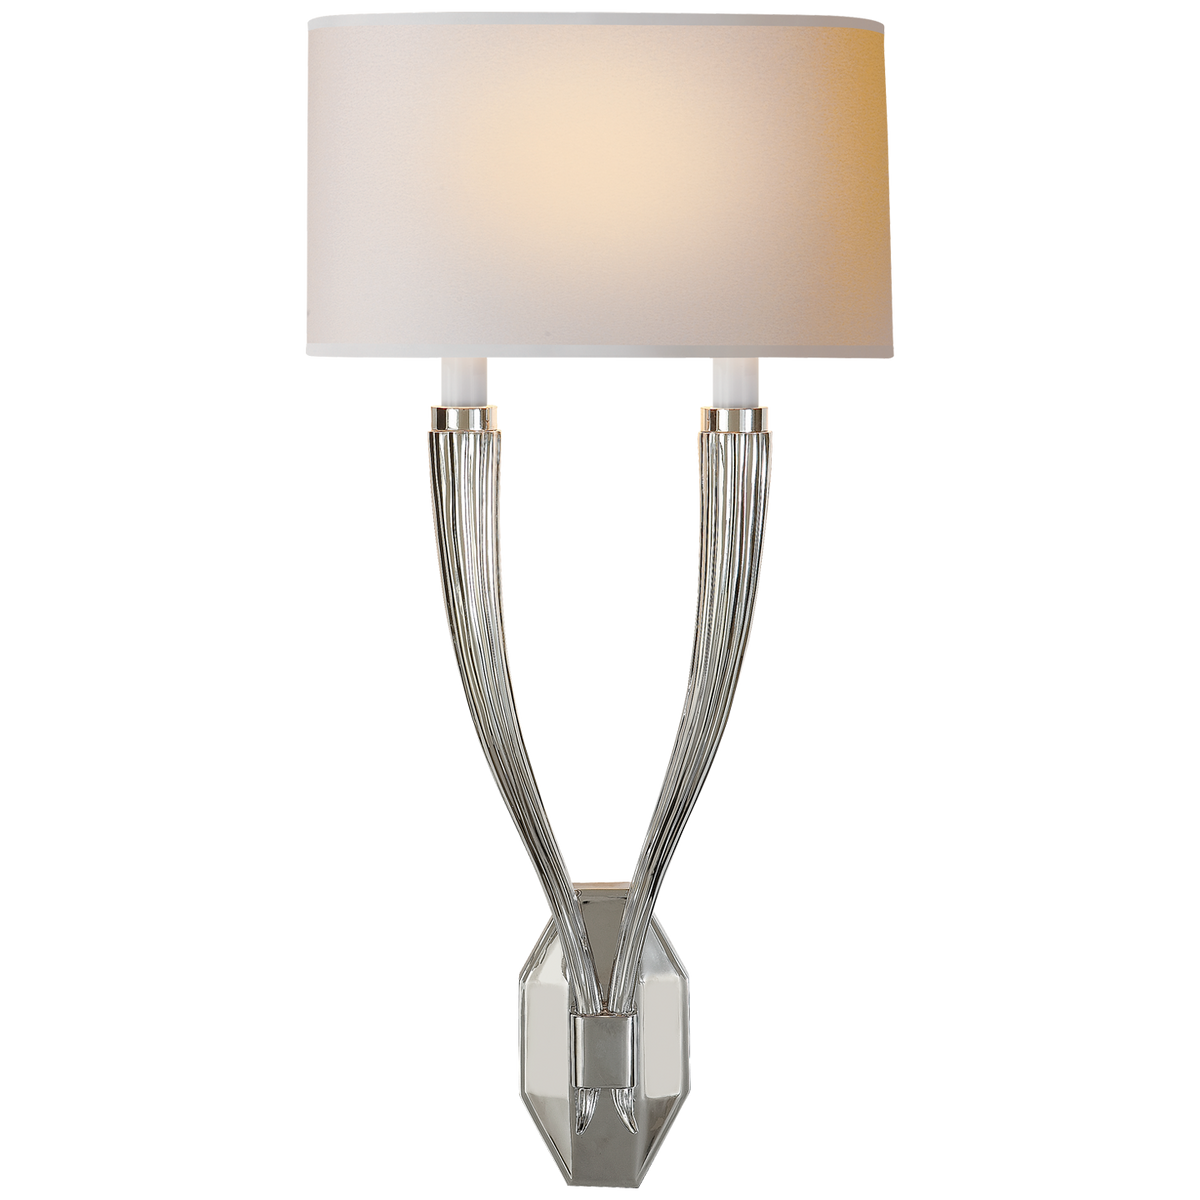 Ruhlmann Double Sconce - Polished Nickel with Natural Paper Shade